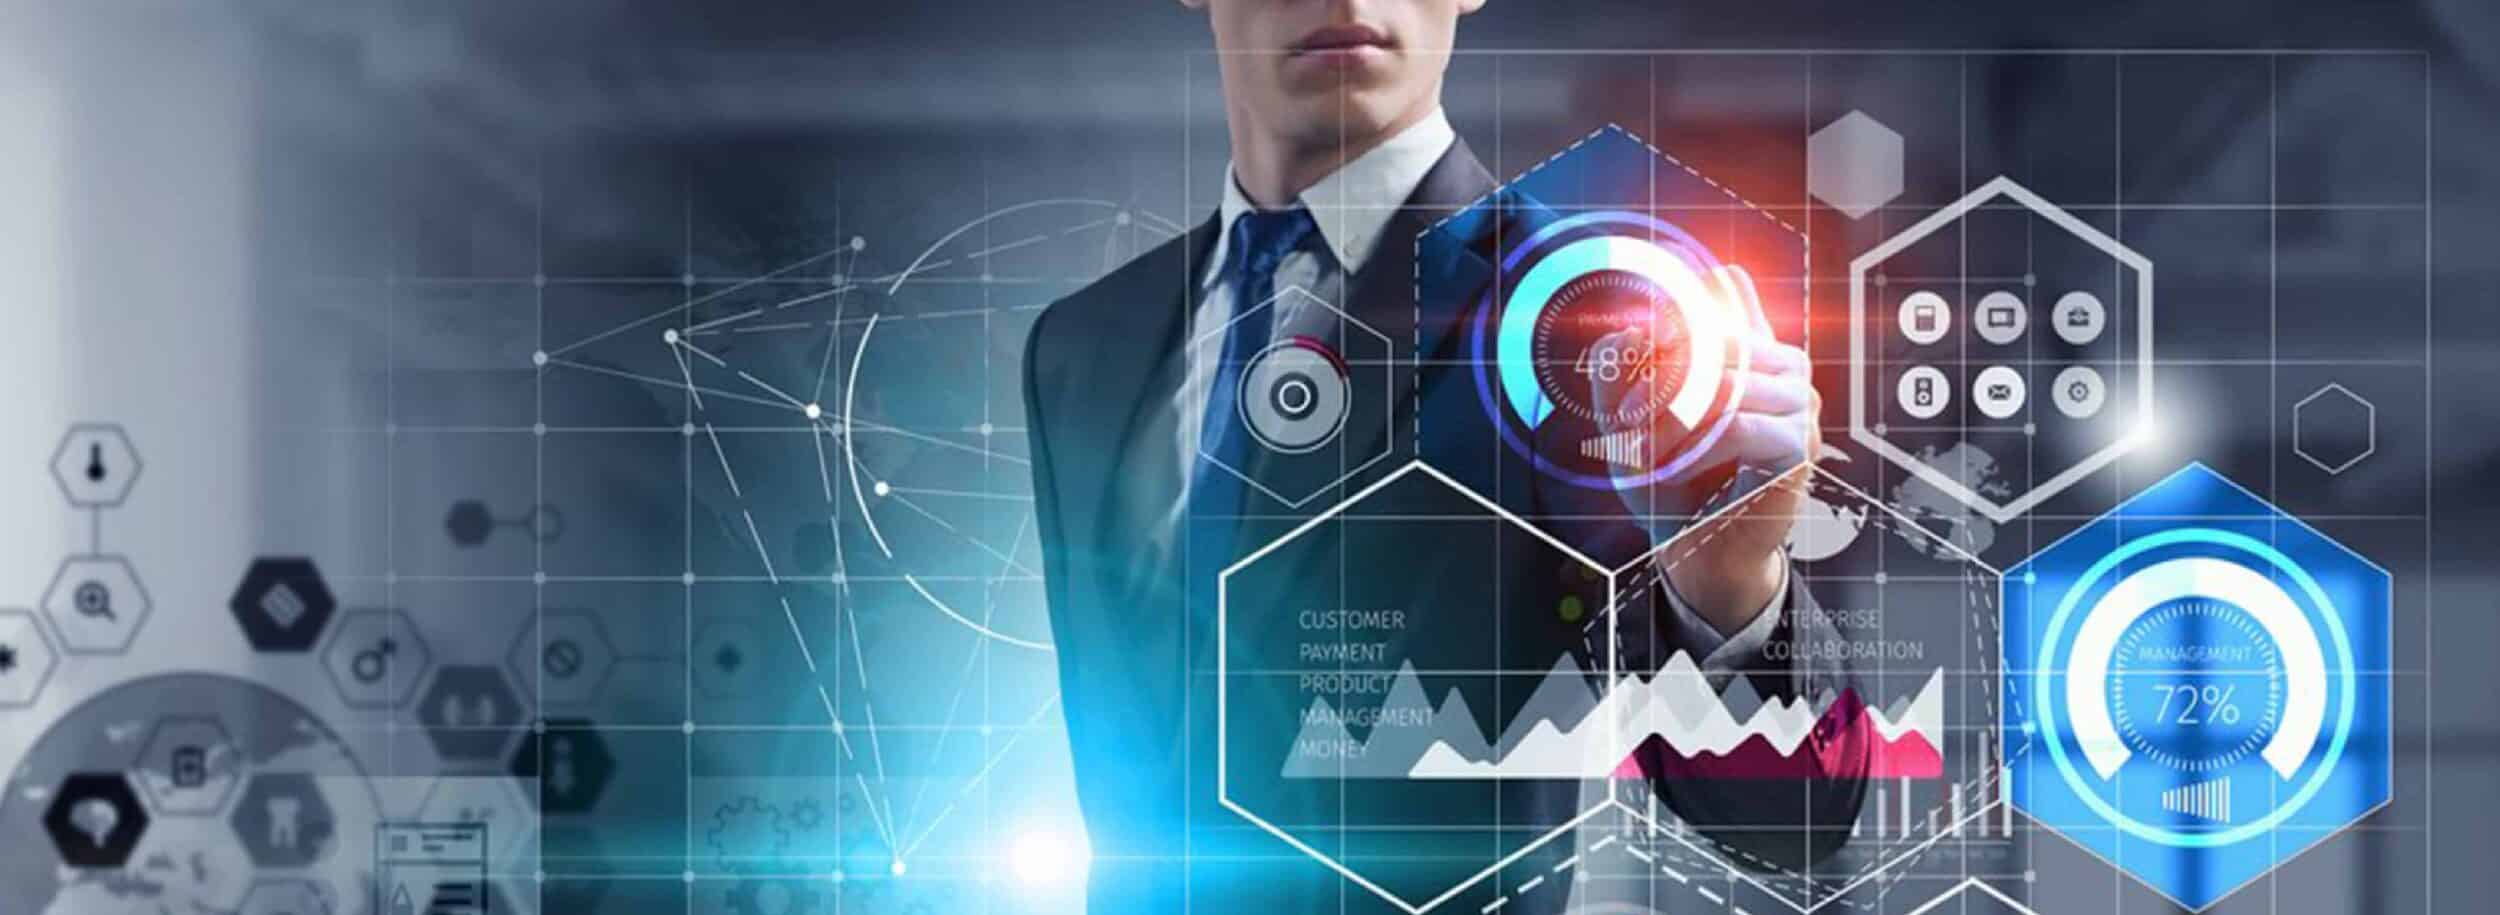 Trends of the IT industry that will develop in 2018